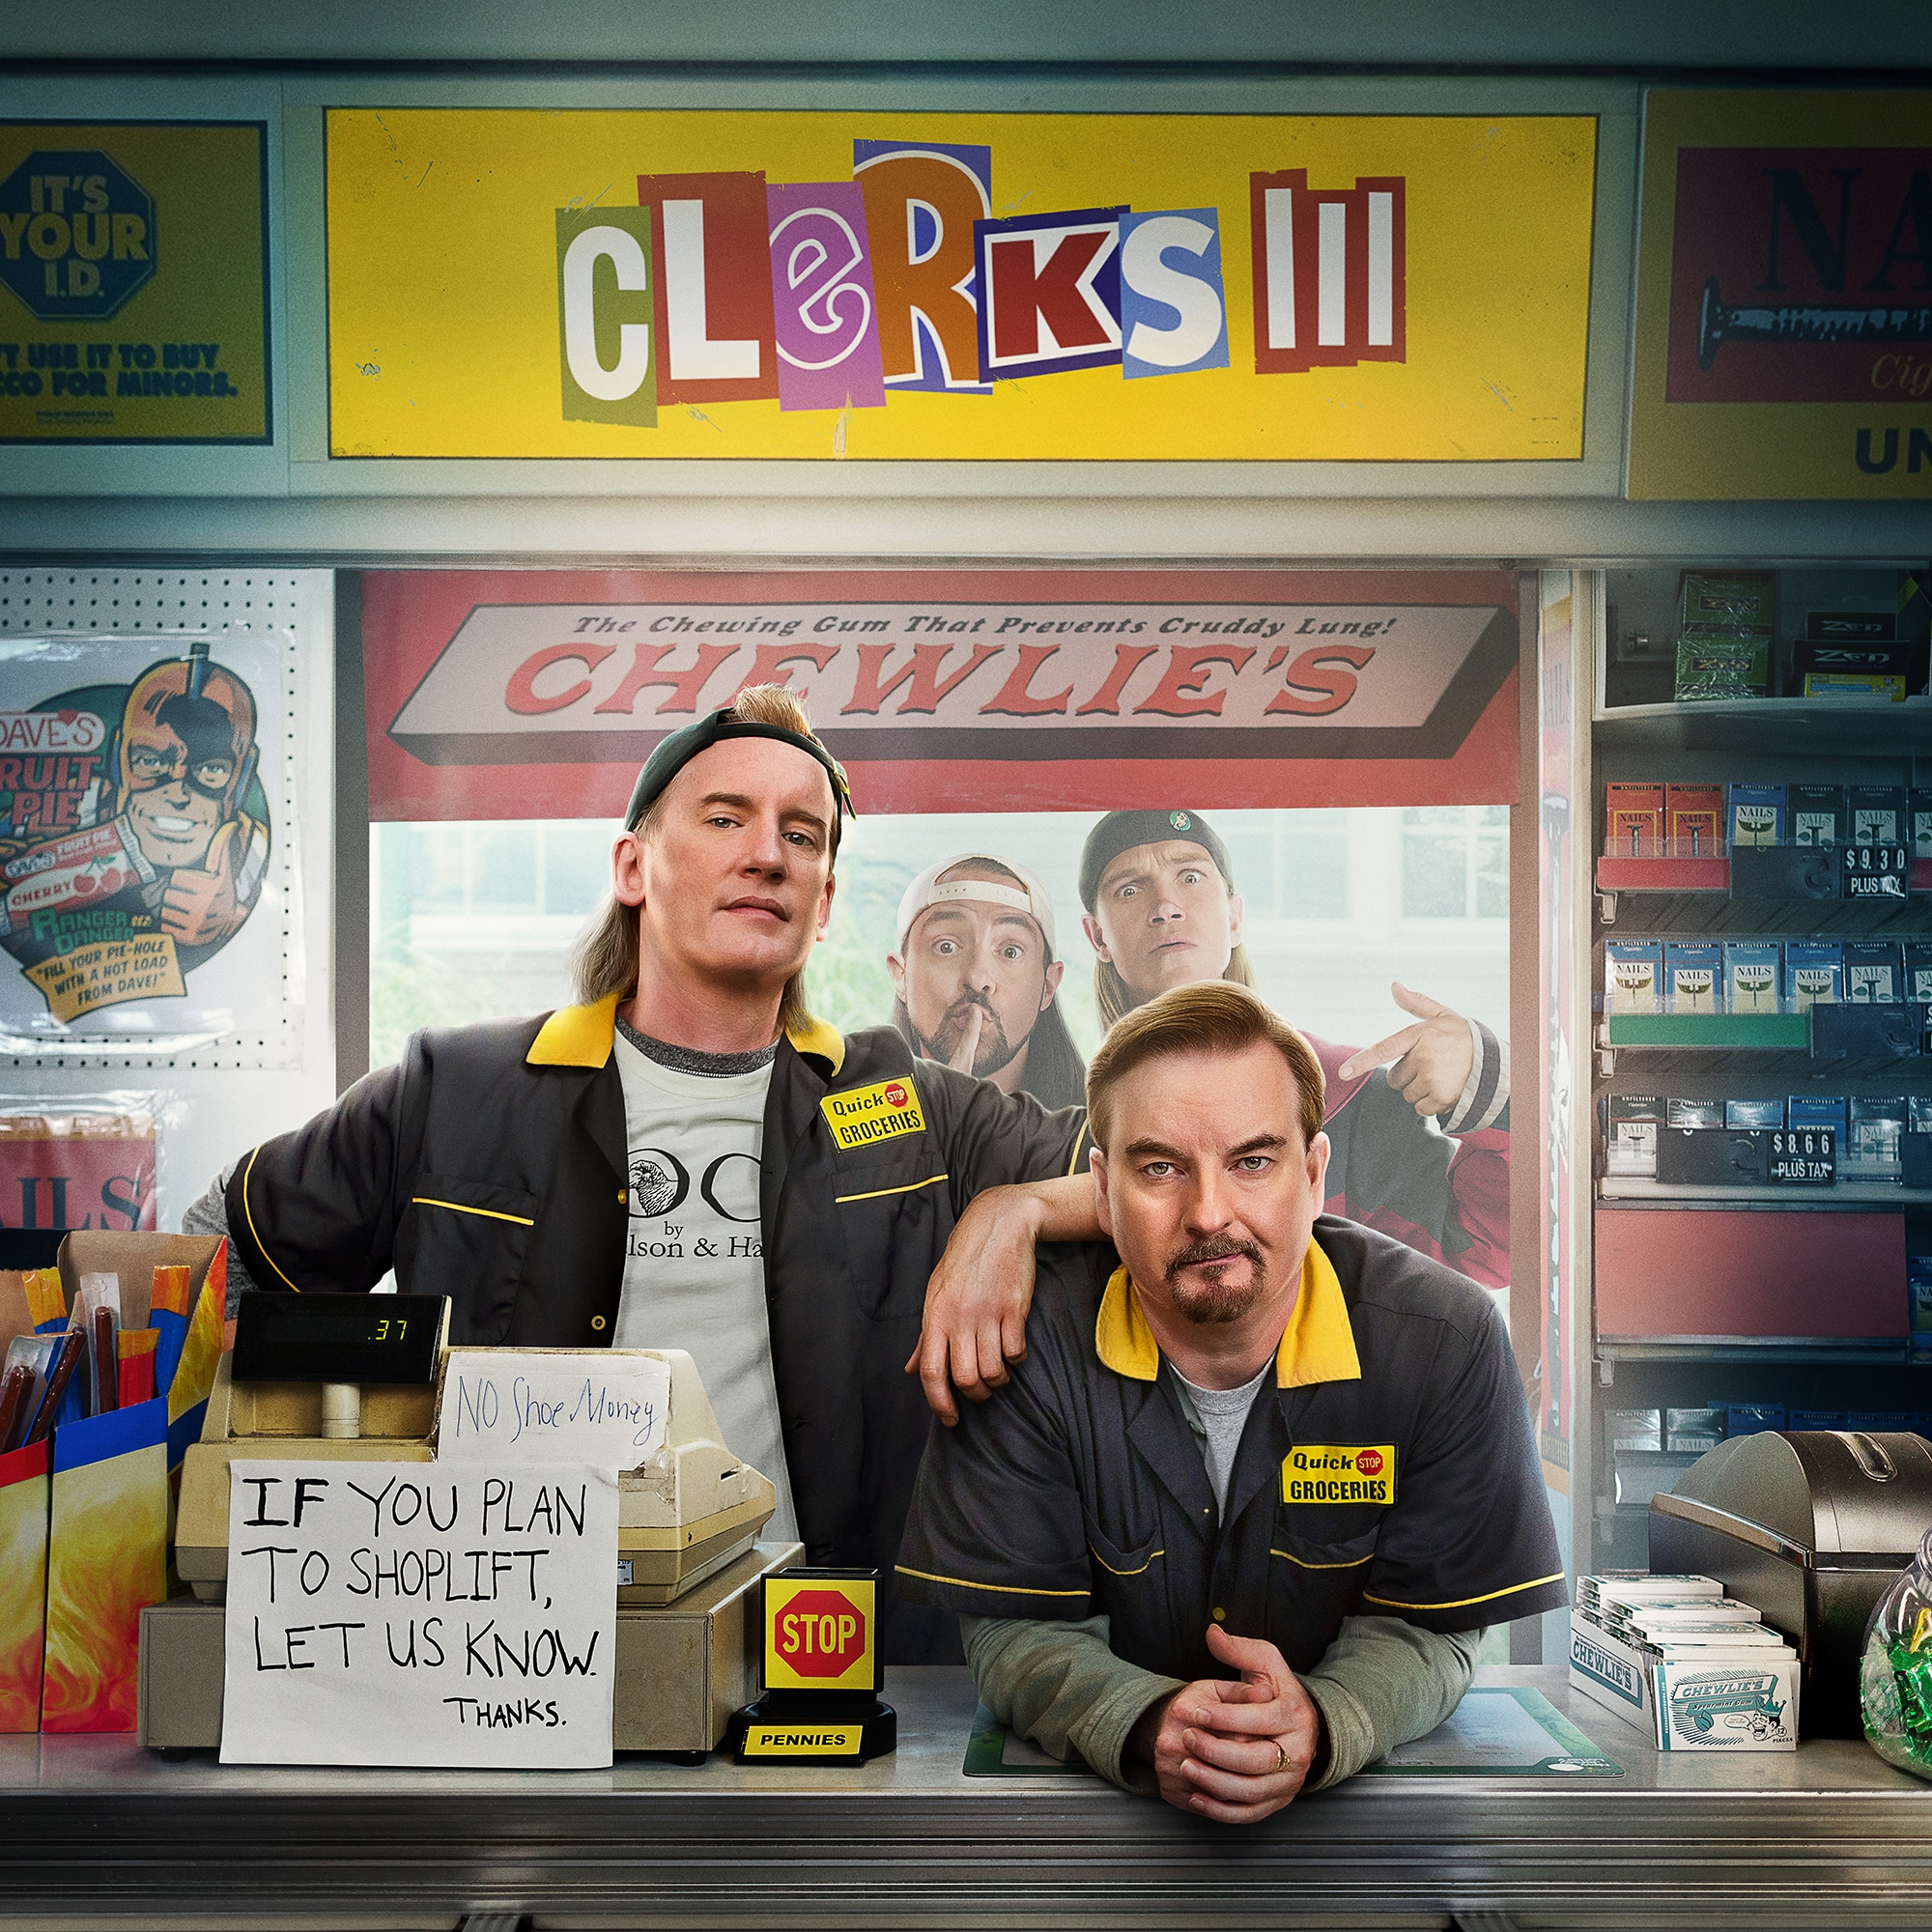 Clerks III: The Convenience Tour!